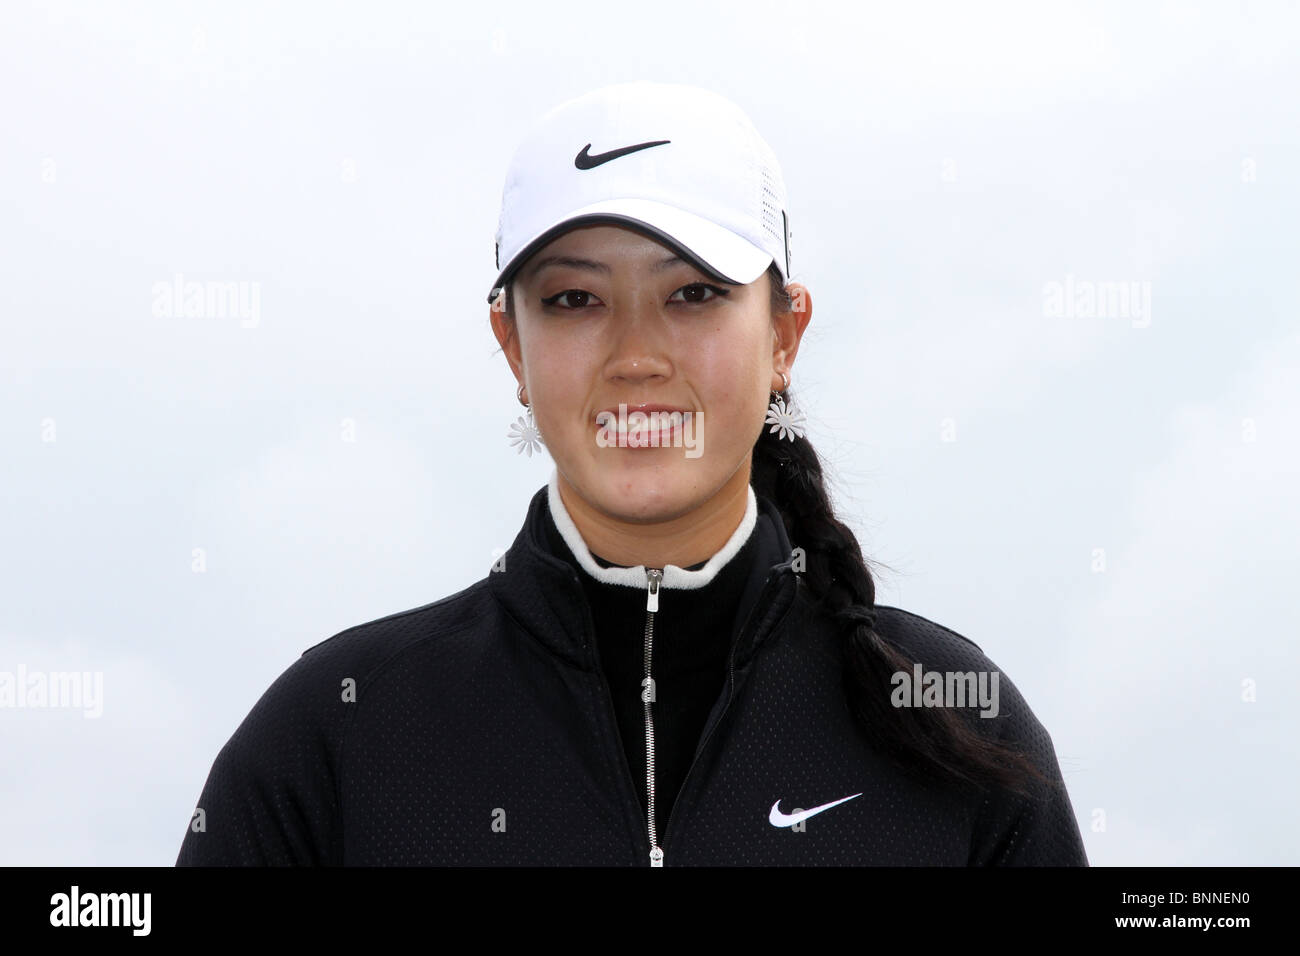 Michelle Sung Wie West American professional golfer at the 35th Ricoh Women's British Open at The Royal Birkdale Golf Club, Southport, Merseyside, UK Stock Photo